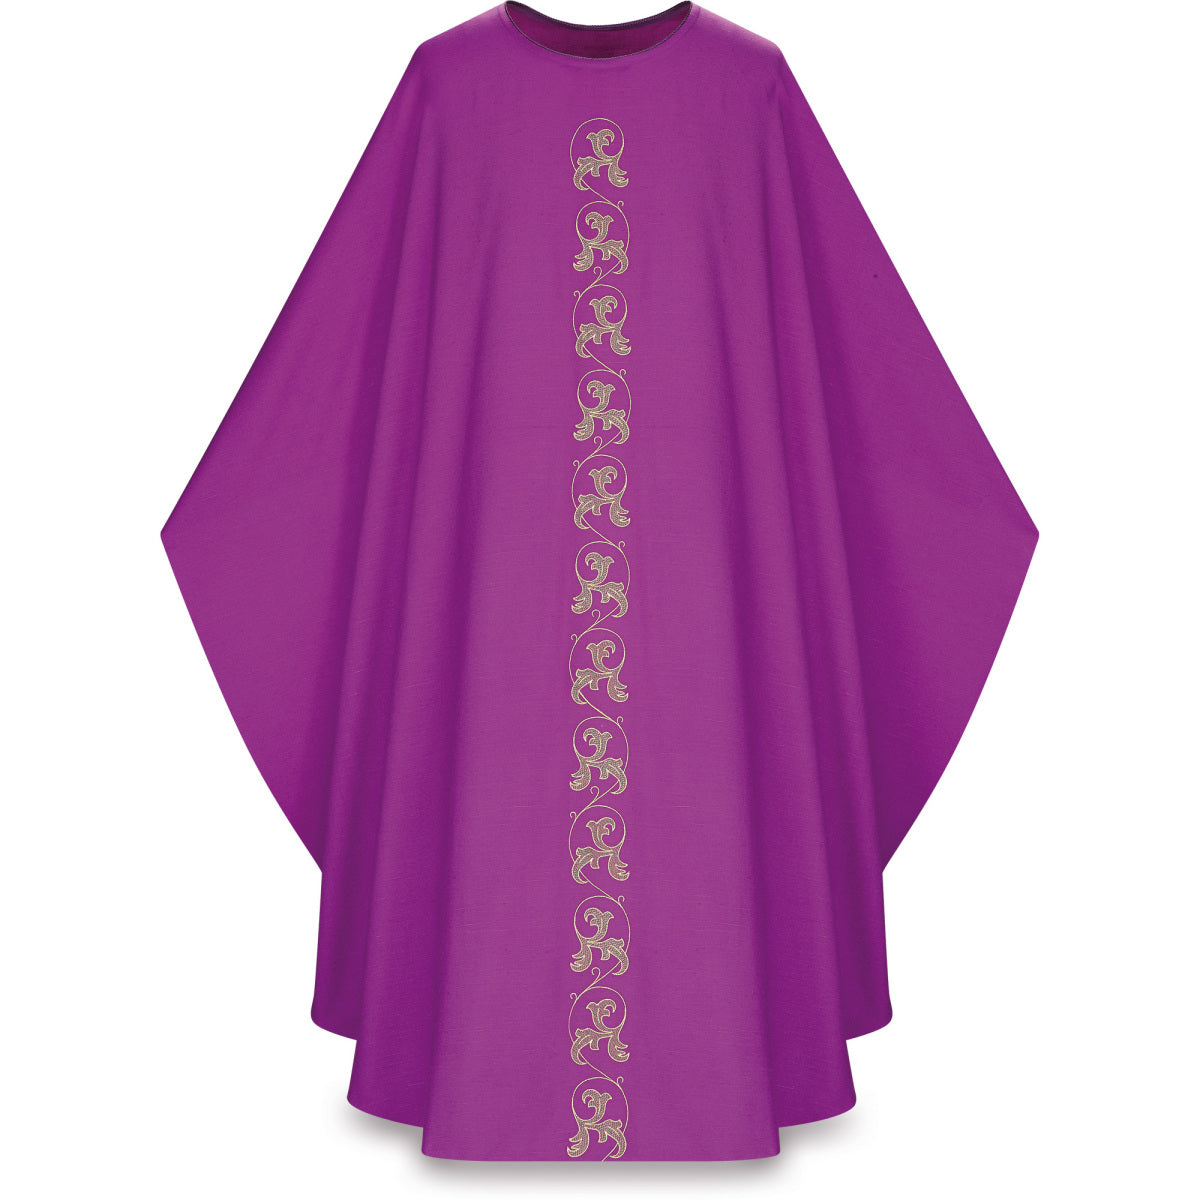 Priest Chasuble | Embroidered Floral Motif 5224